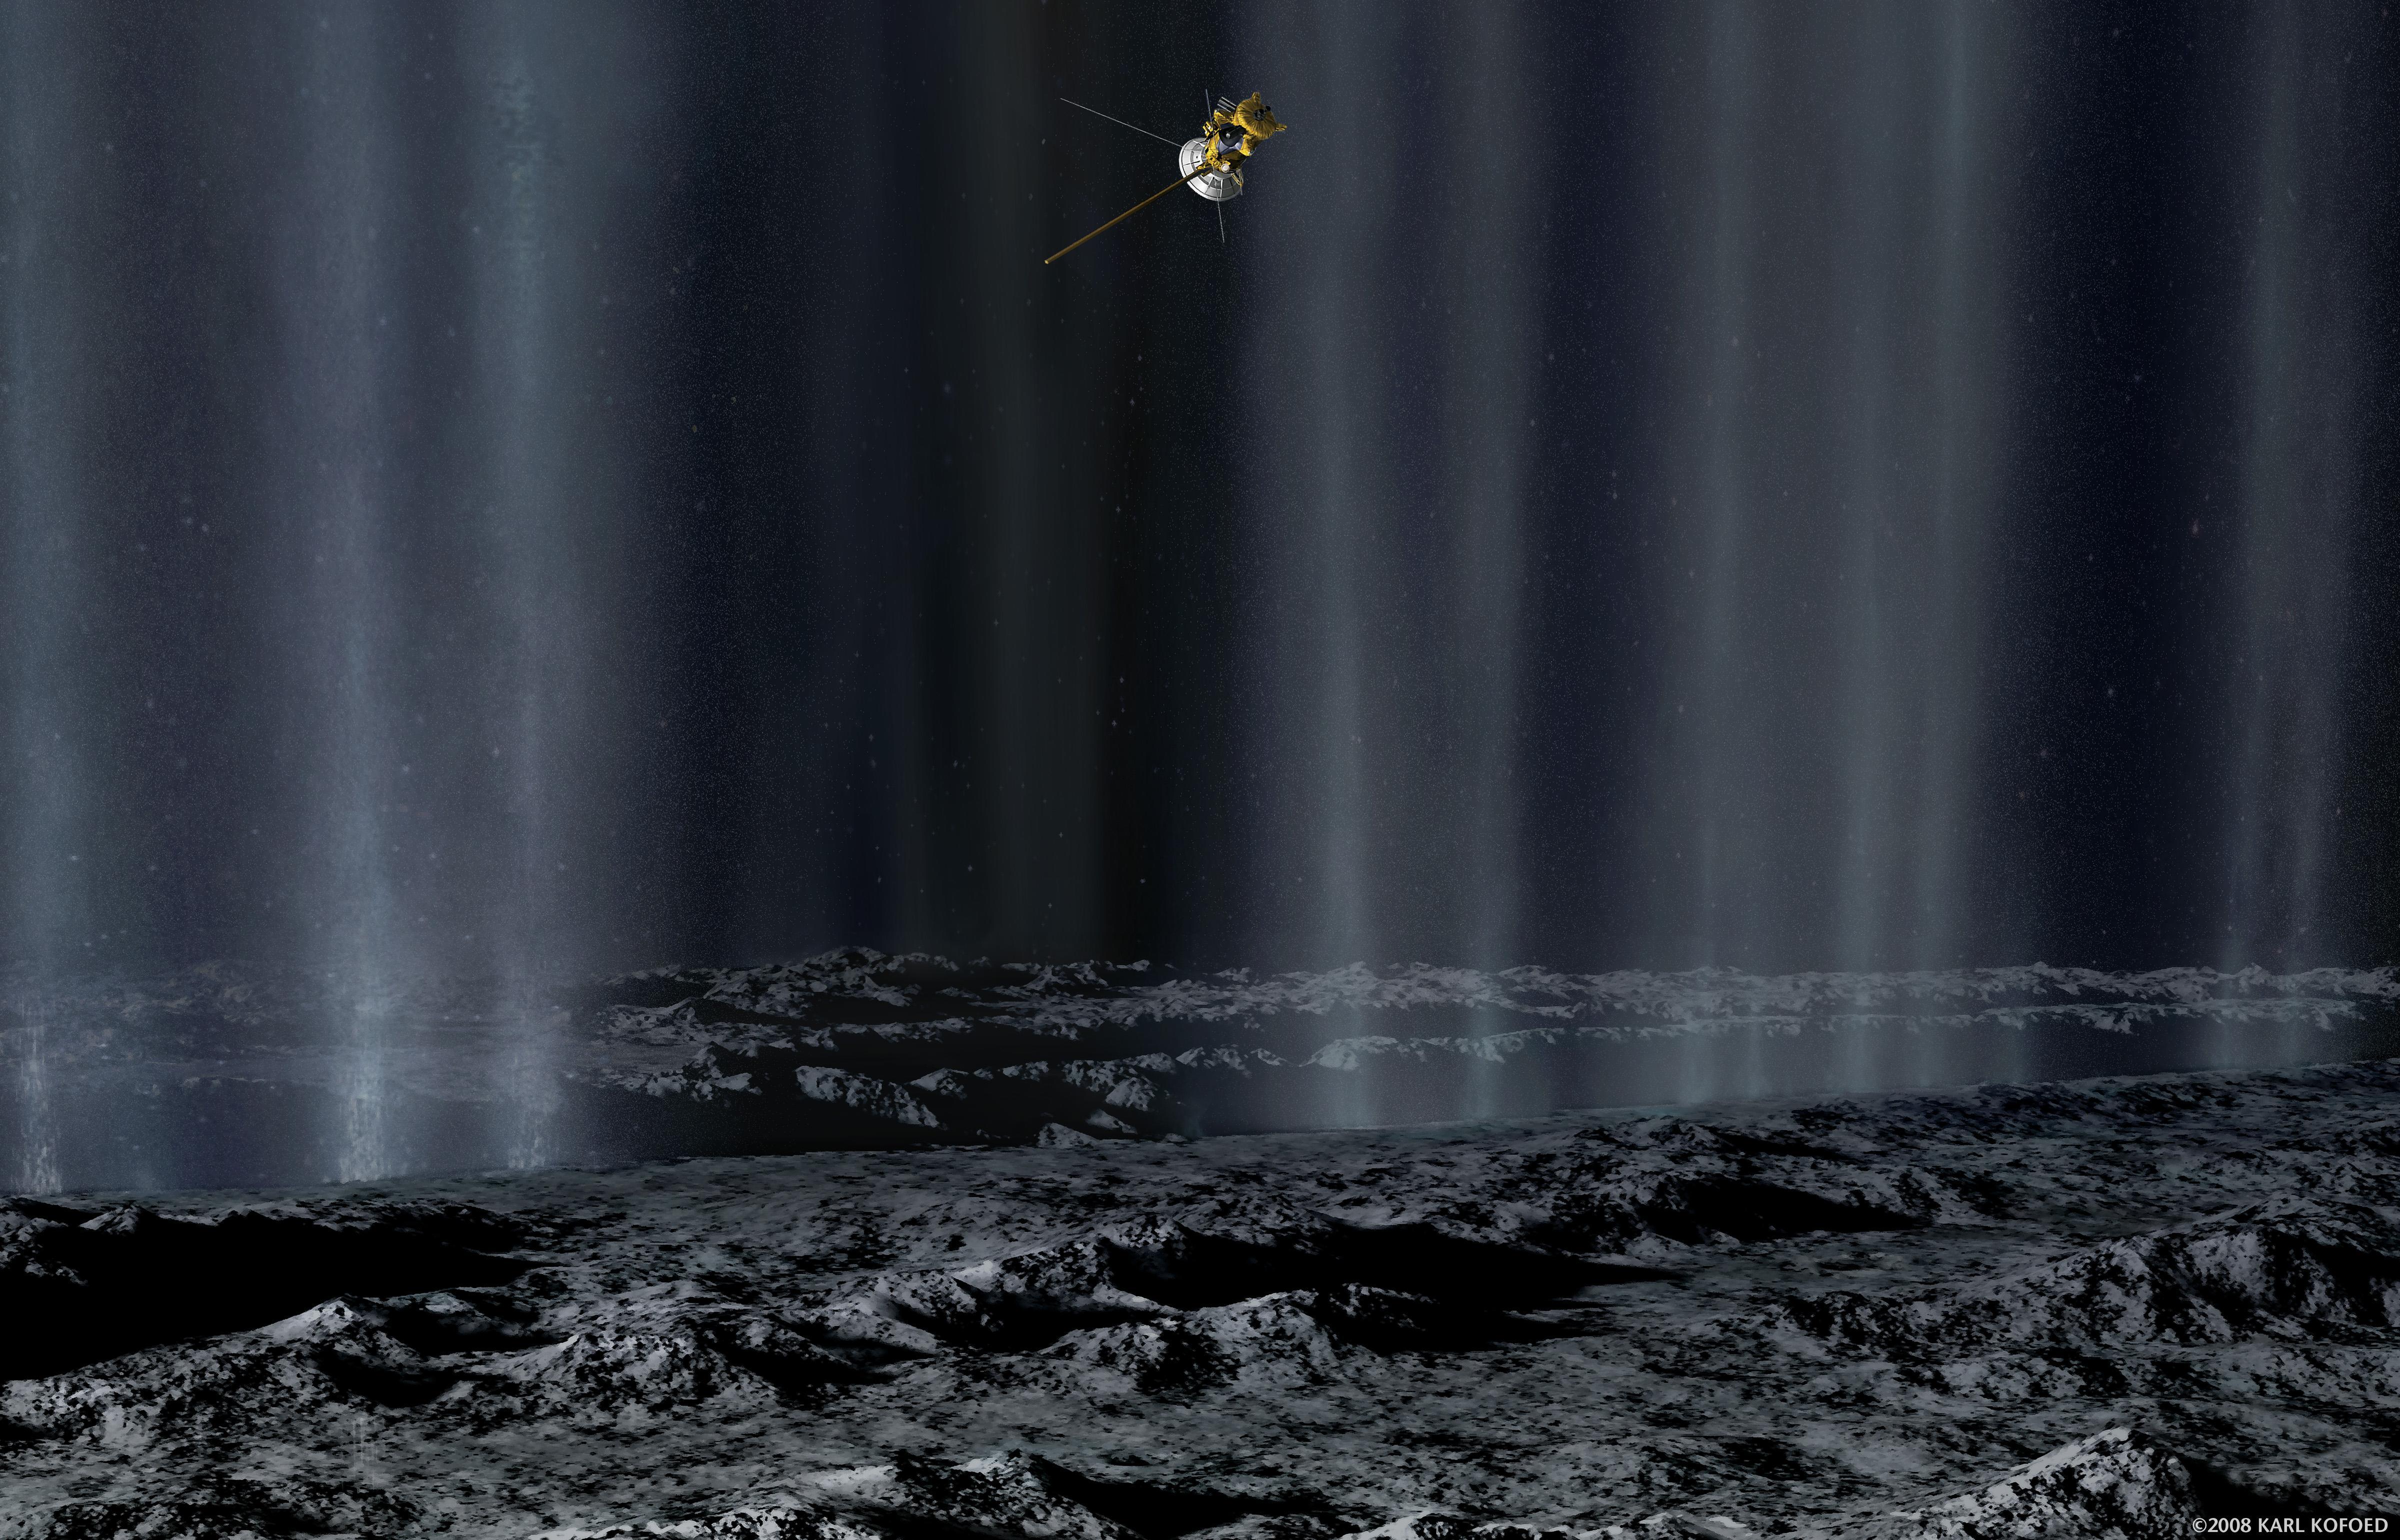 Artist's concept of a close flyby of Enceladus by the Cassini spacecraft